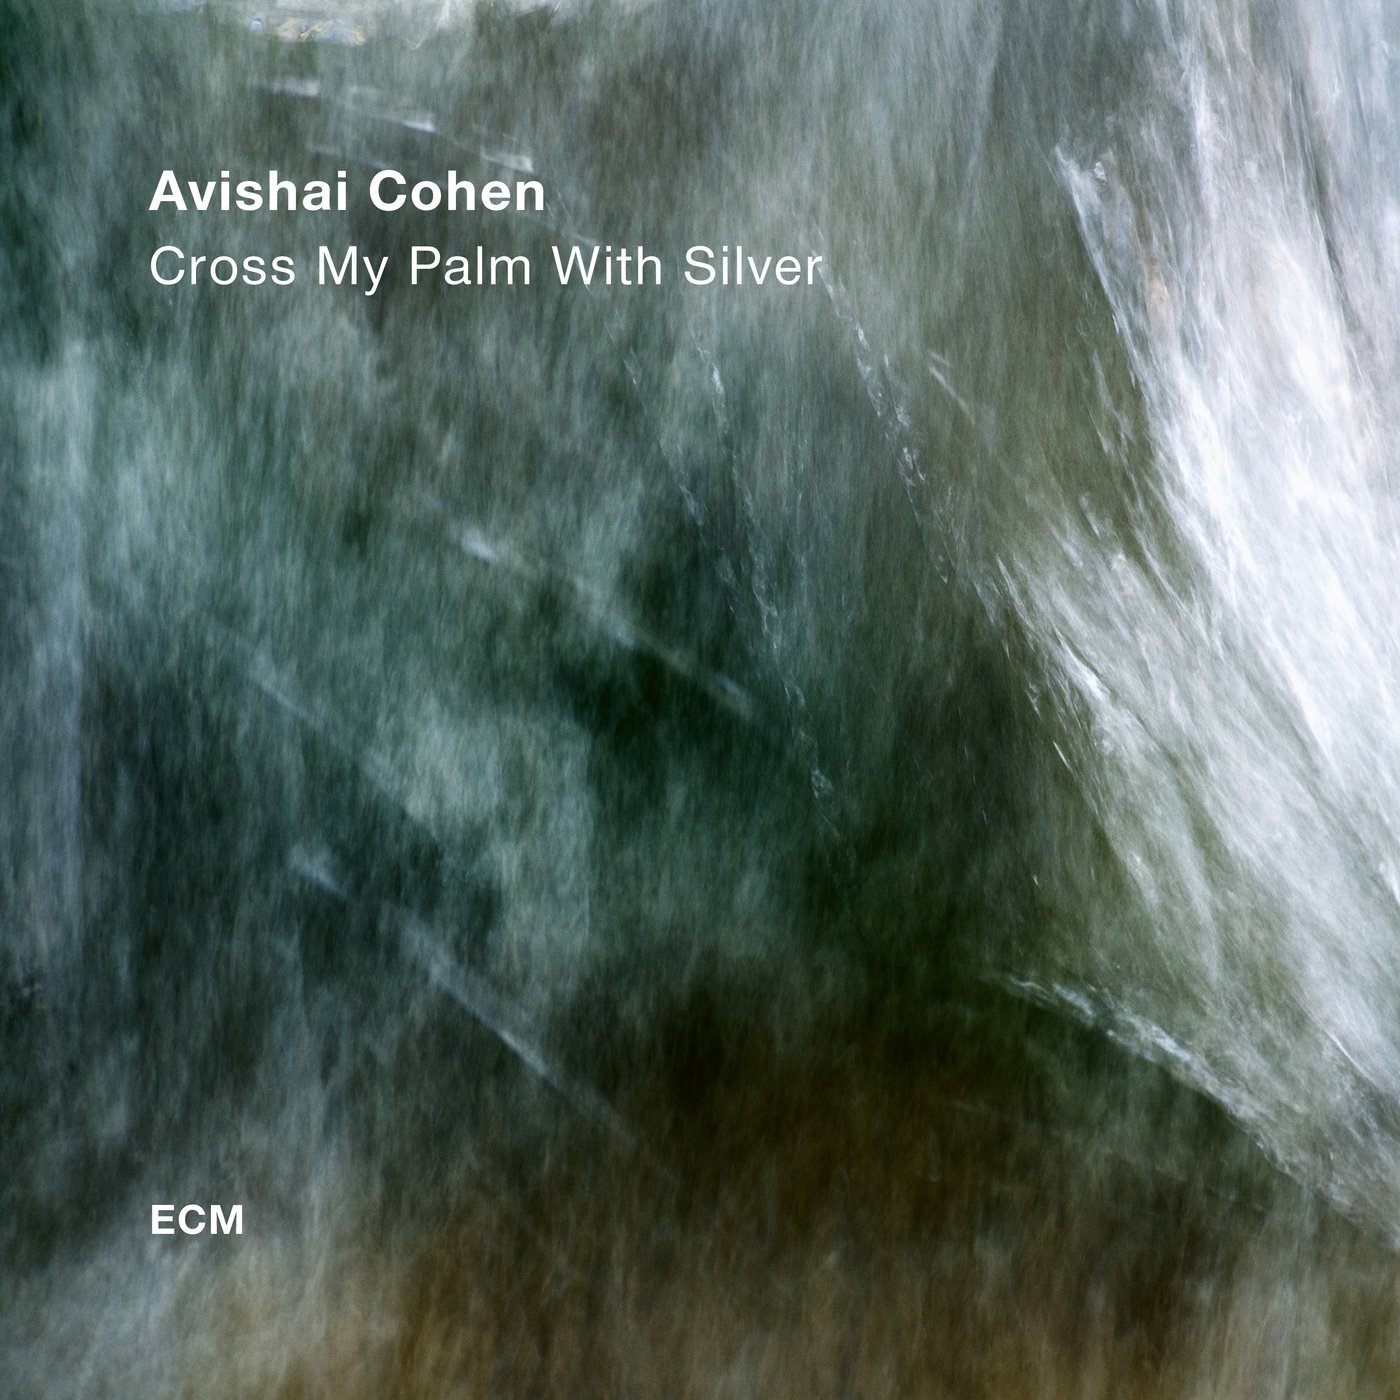 REVIEW: Avishai Cohen - Cross My Palm With Silver